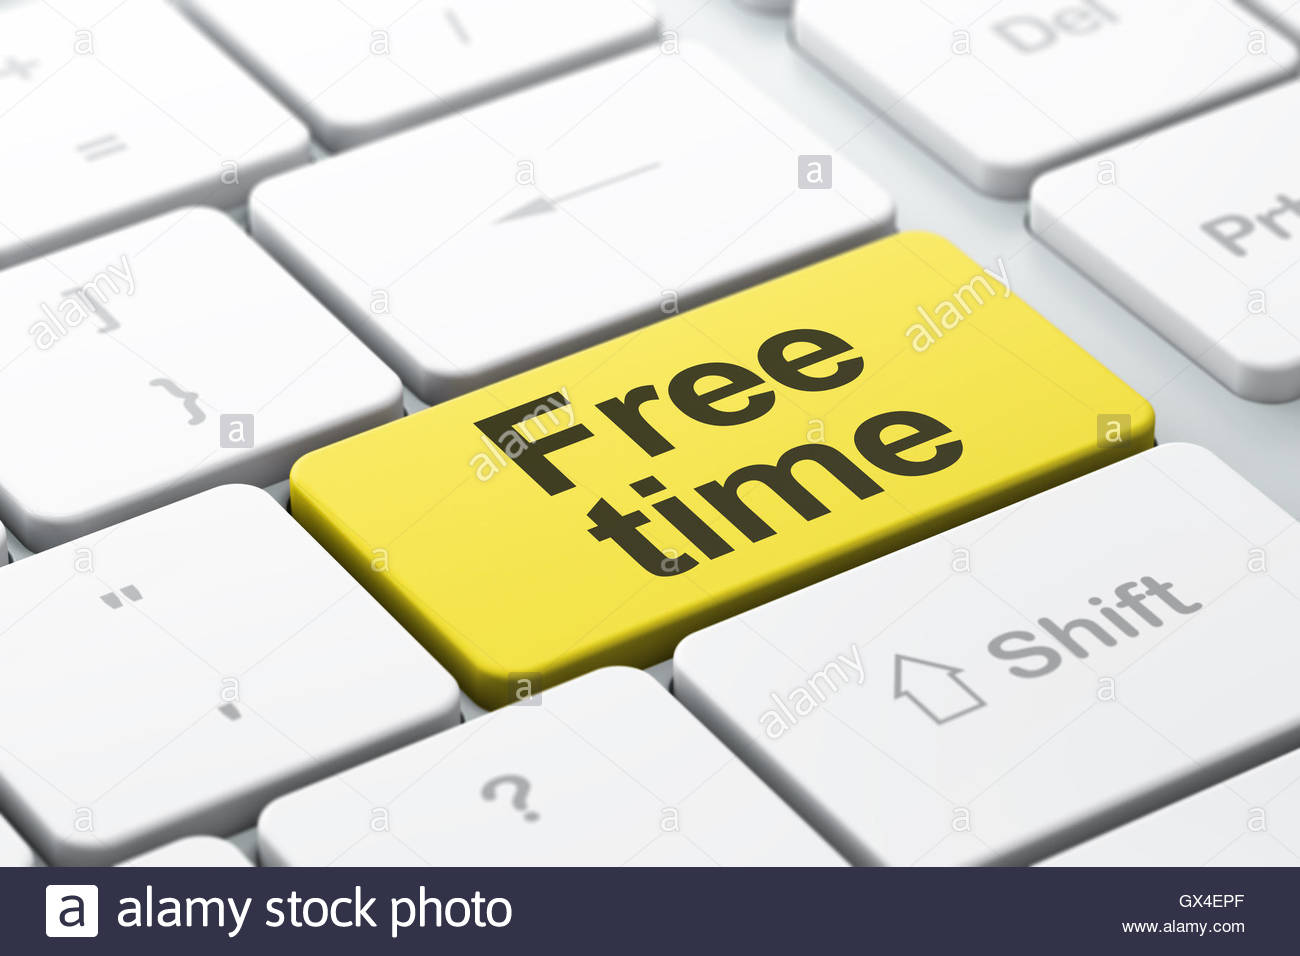 Timeline concept Free Time on computer keyboard background Stock